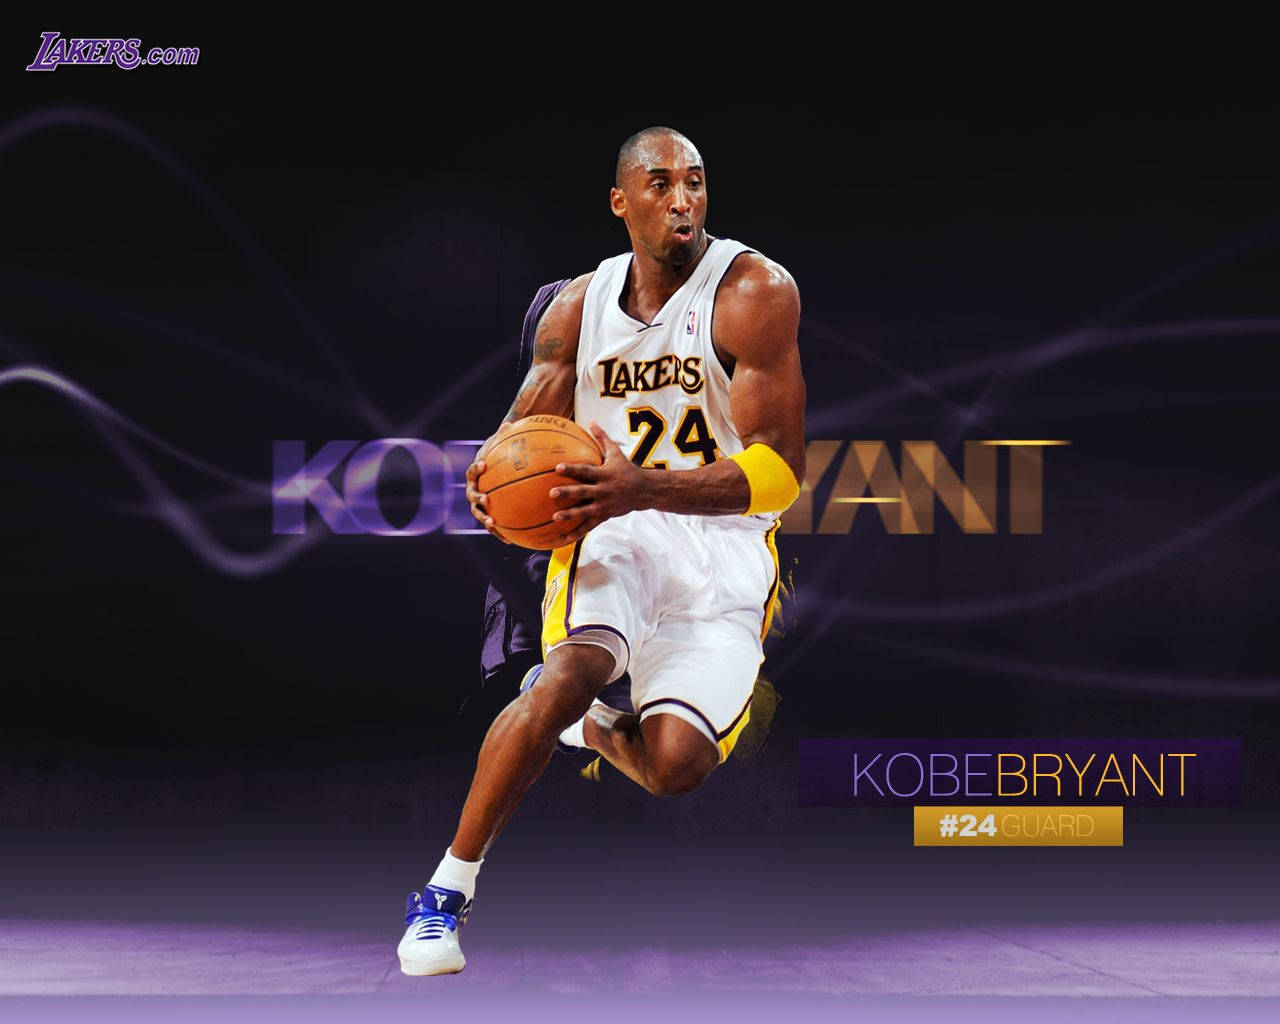 "For 20 years, Kobe Bryant was a force of nature on the basketball court." Wallpaper